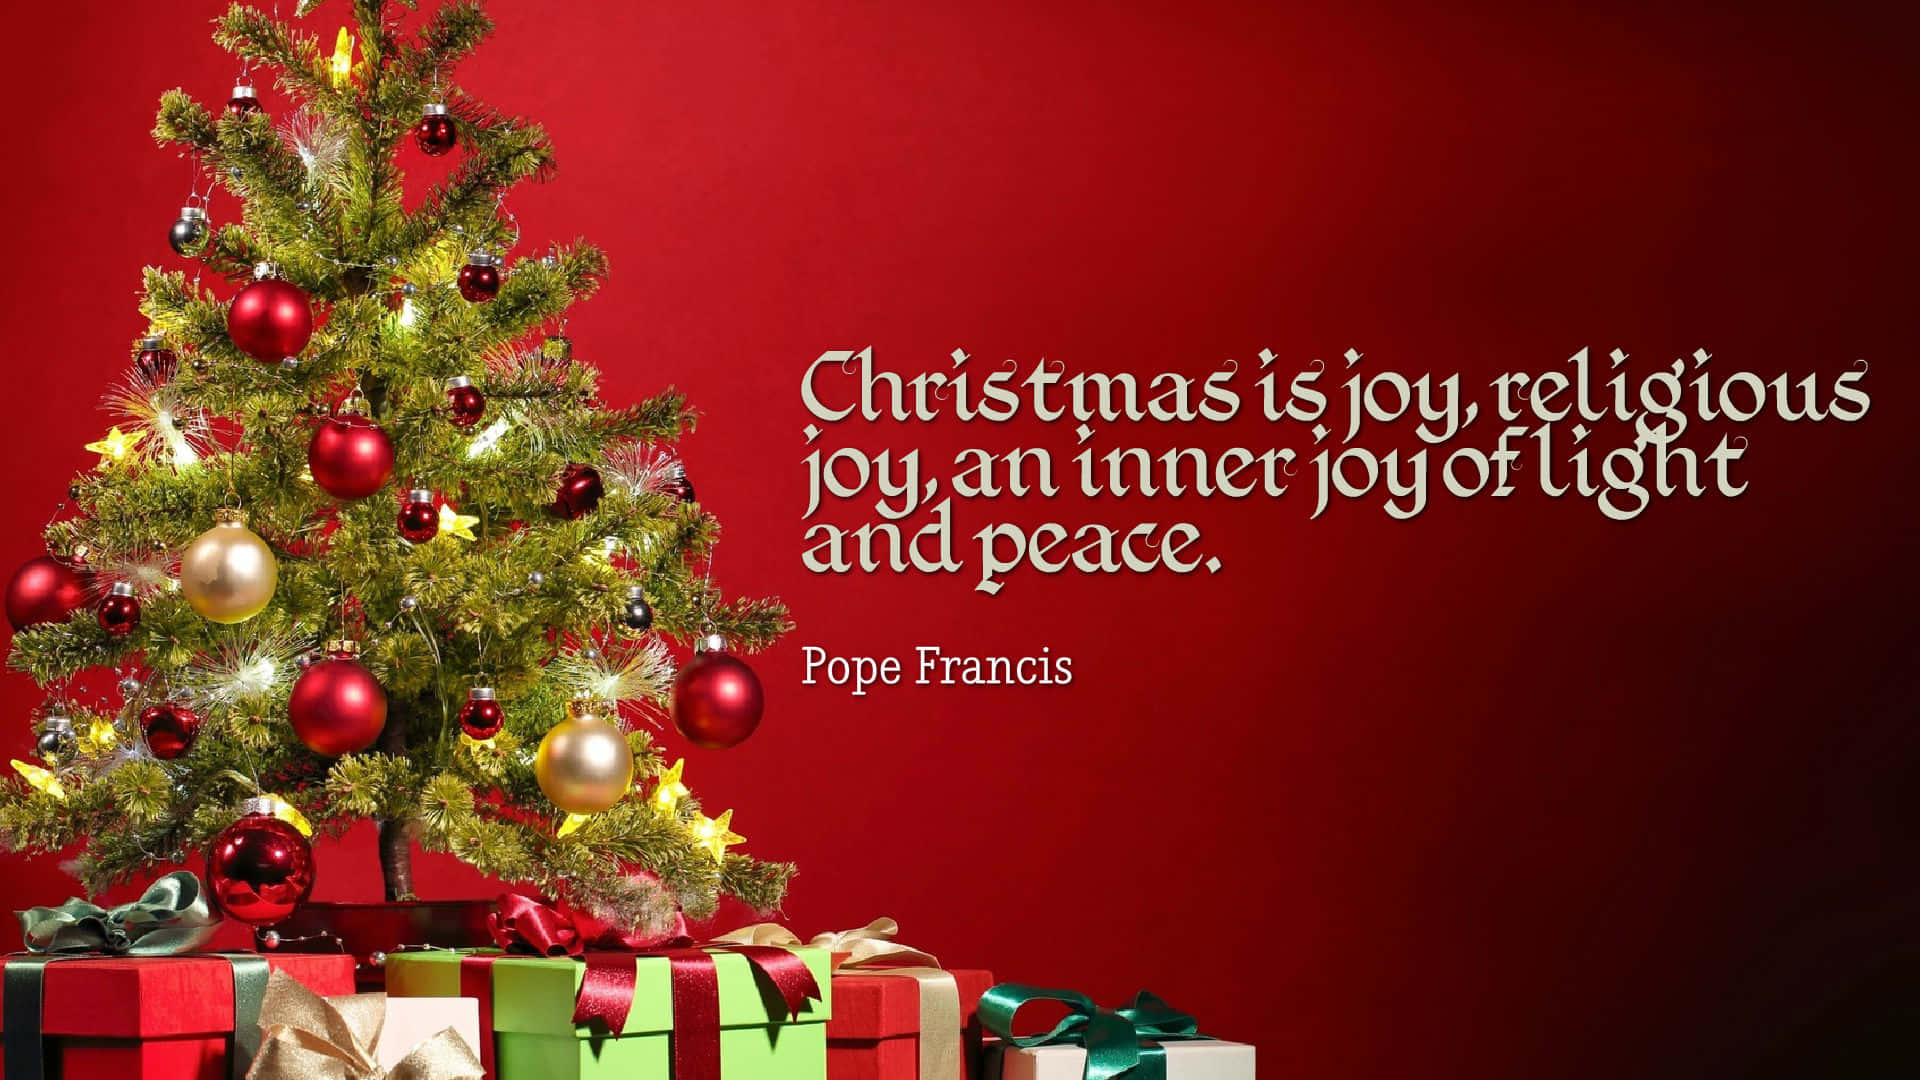 Let us celebrate Christmas with love, joy and peace Wallpaper